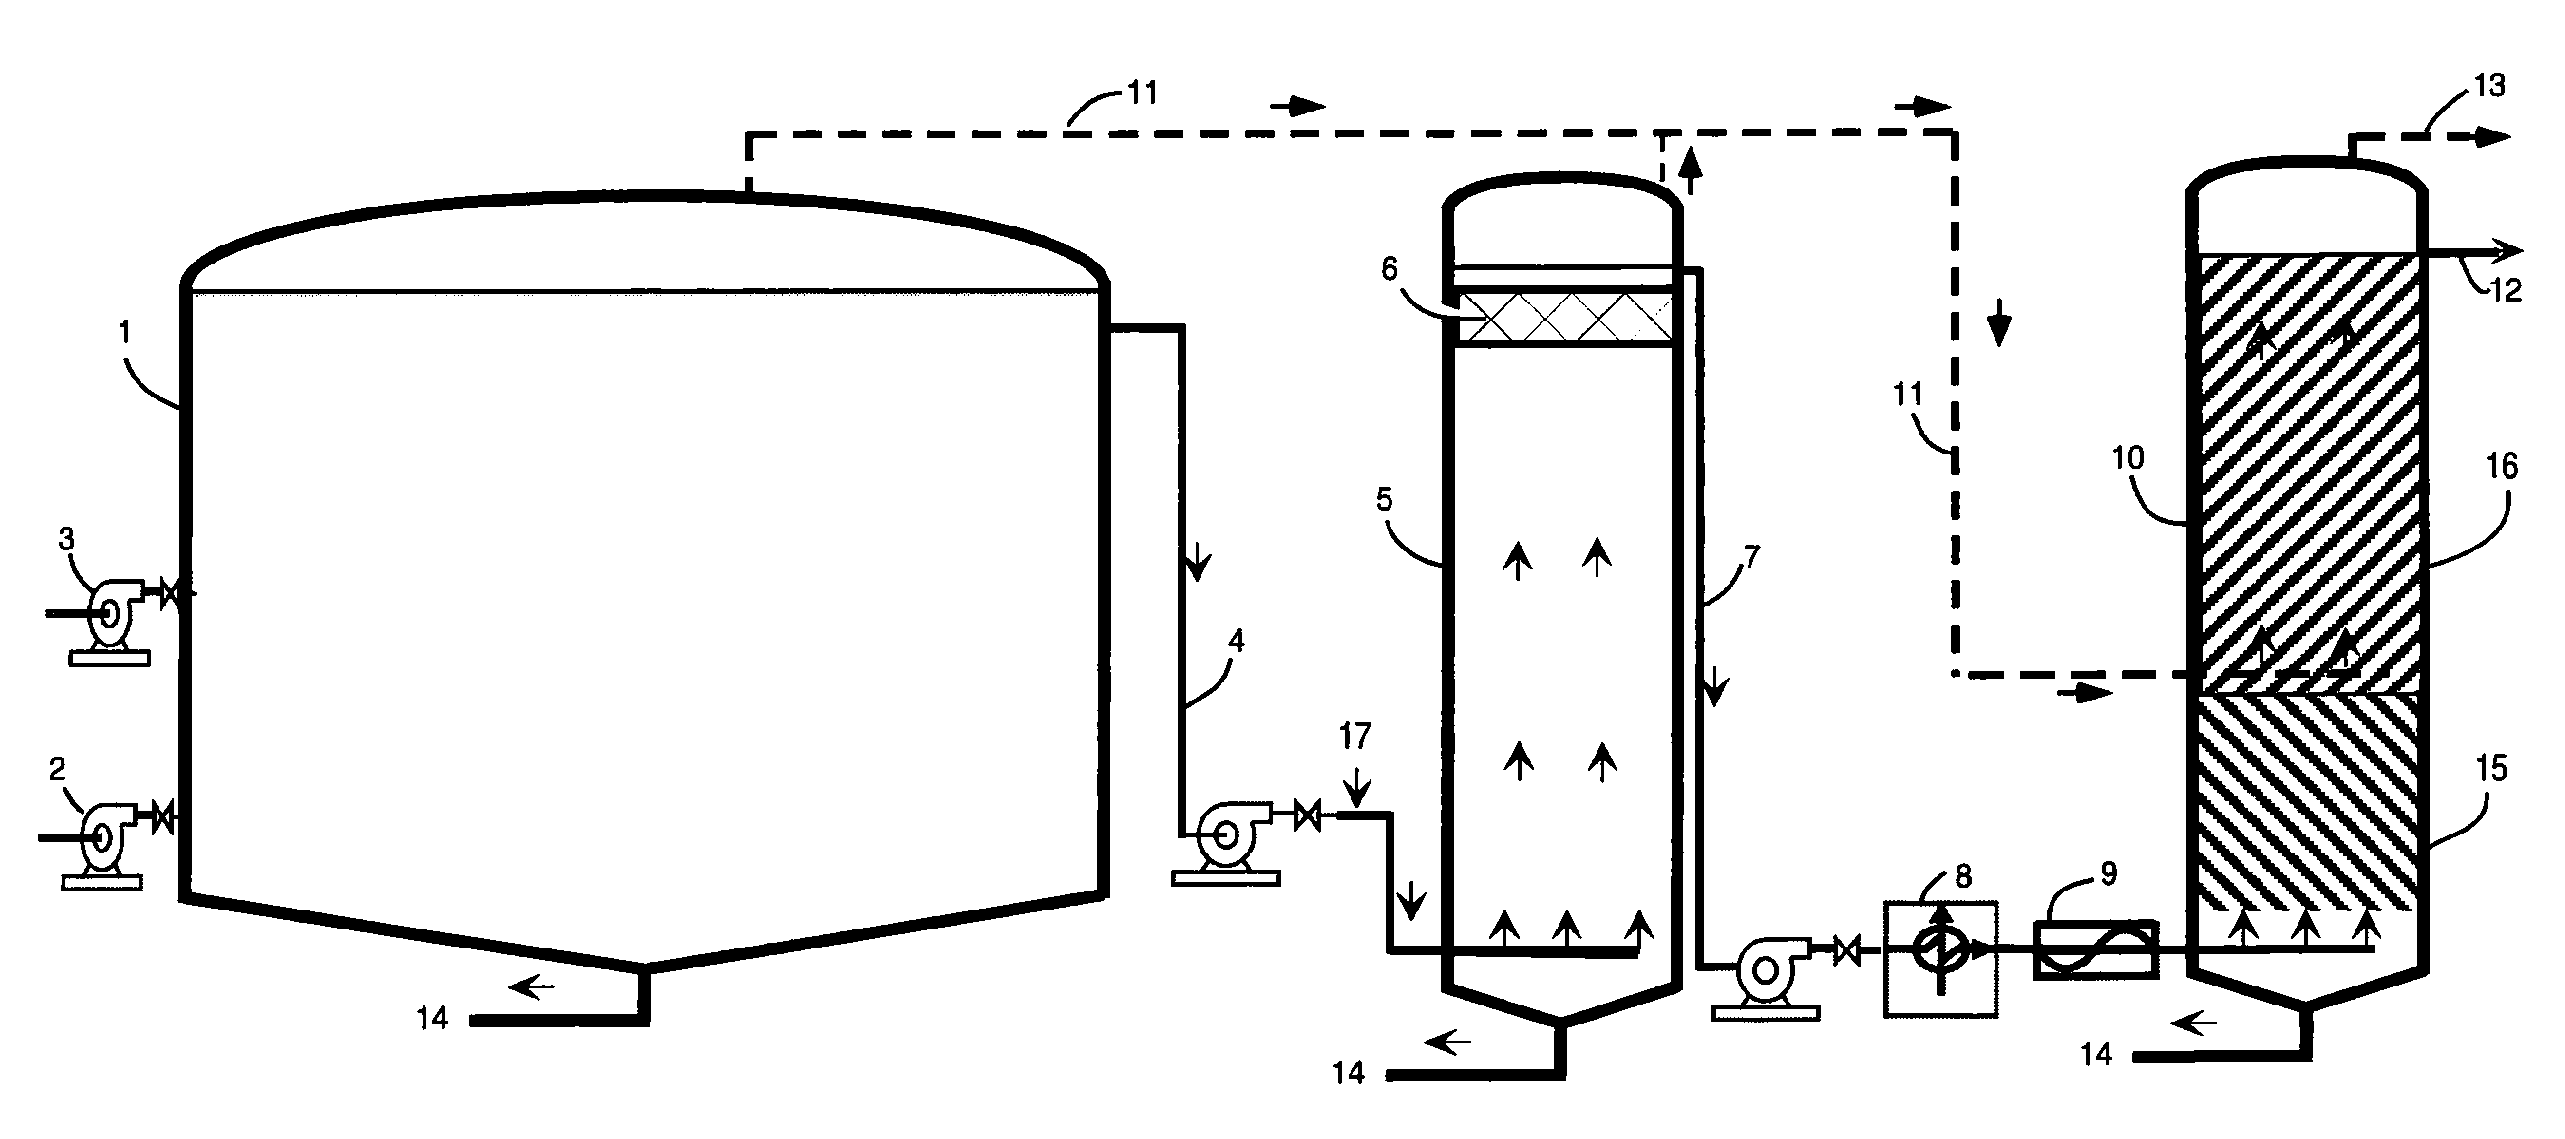 Three stage, multiple phase anaerobic digestion system and method